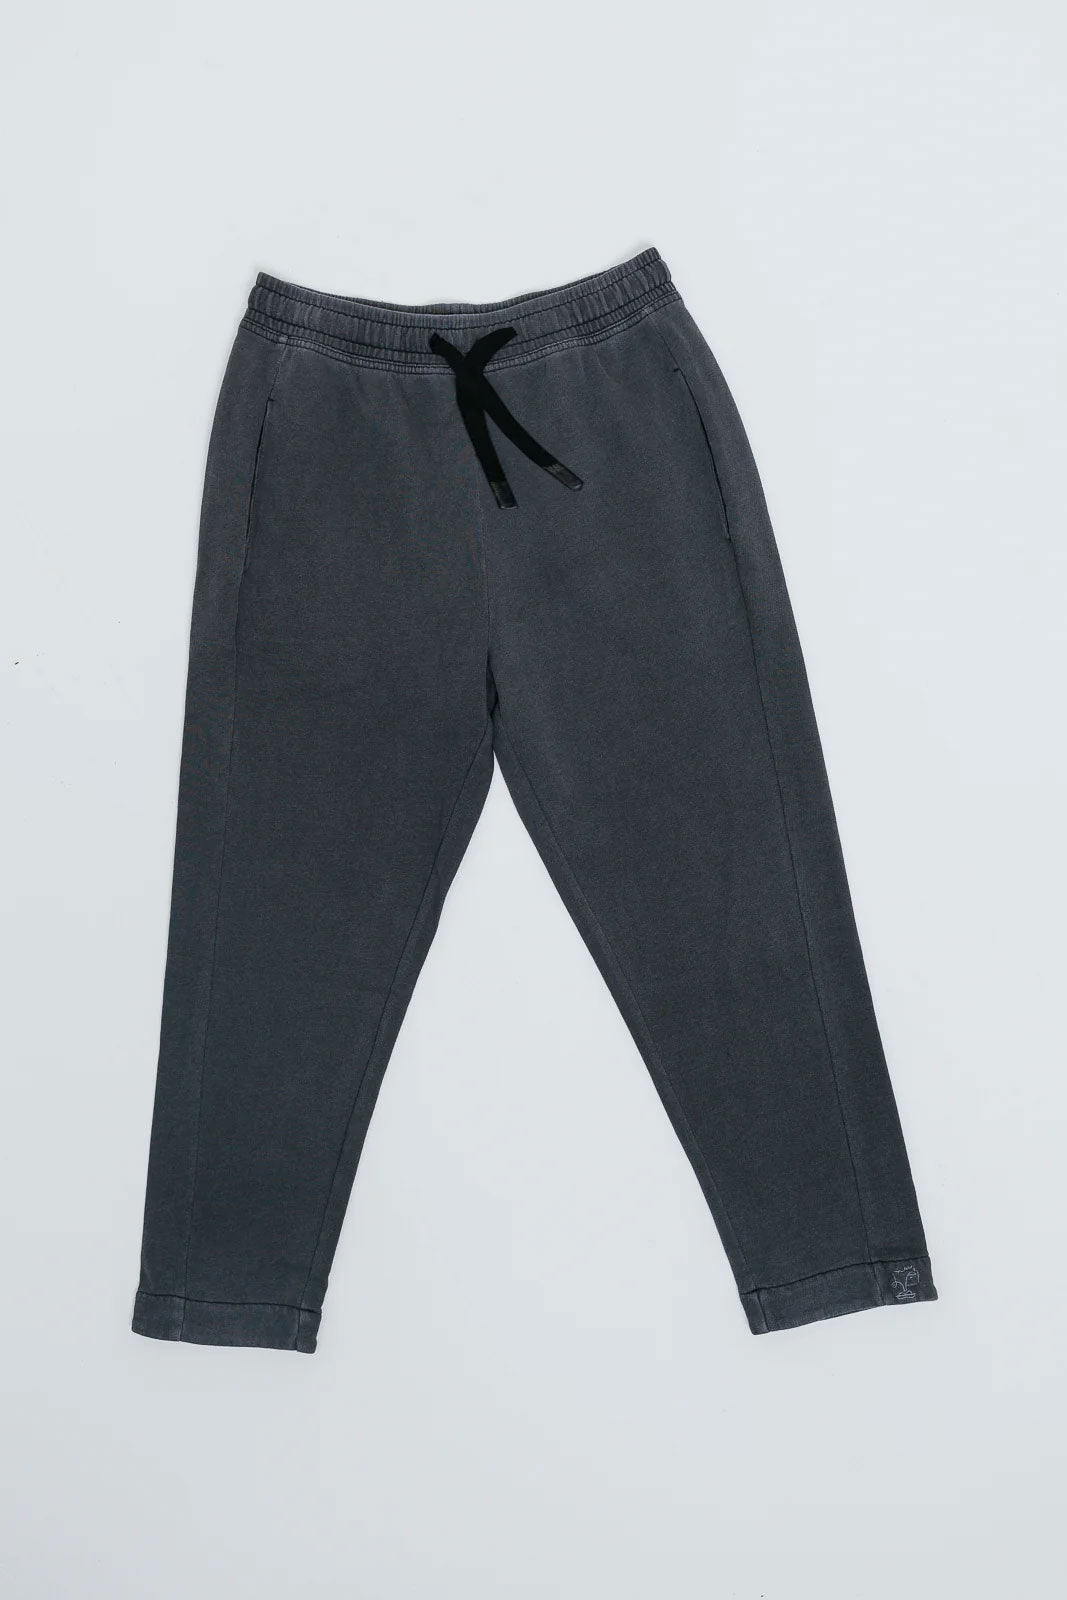 Homer Trackie | Carbon | Mens